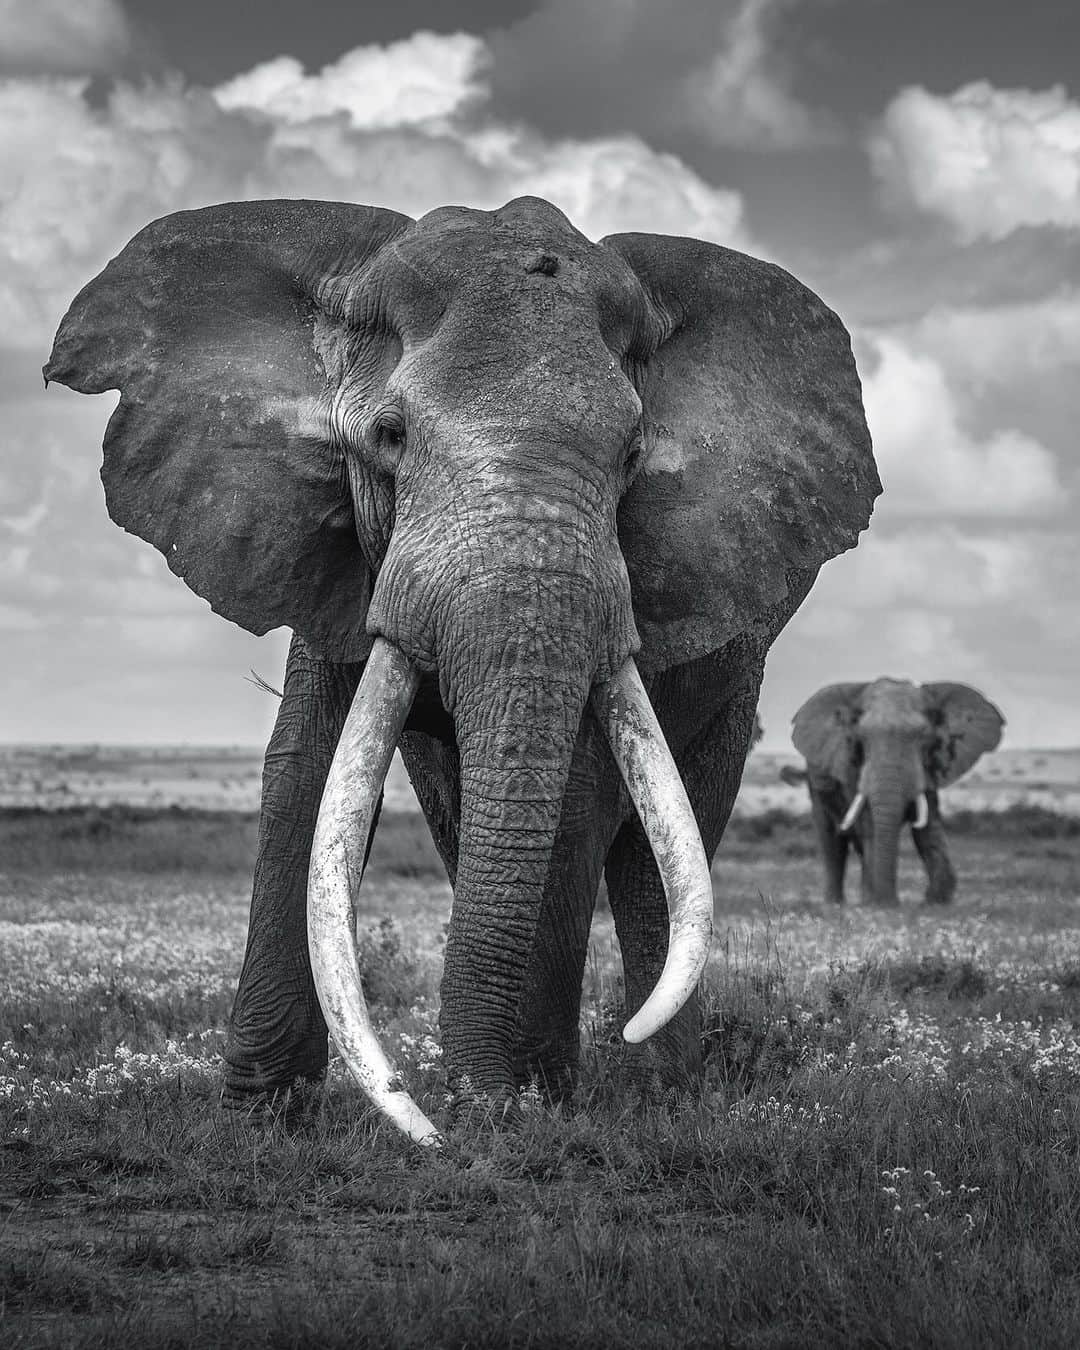 Chase Dekker Wild-Life Imagesのインスタグラム：「This elephant is named Craig and he is one of the last remaining “big tuskers” on the planet. A “tusker” is a term given to elephants who have tusks that almost reach the ground. These were once an extremely common sight across the African continent, but due to decades of hunting and poaching, there are less than 30 remaining today. Since these elephants are such large targets for the ivory trade, they are heavily monitored and guarded today. There is hope however that more “tuskers” may be on the way as conservationists and researchers are monitoring individuals who appear to be on track to breaking tusk length records within the next few decades. Even though the males with extremely large tusks may not be the largest bodied elephants, the weight and length of their extended teeth help with reproductive success as other males tend to back down when sizing up against a large tusked elephant.」